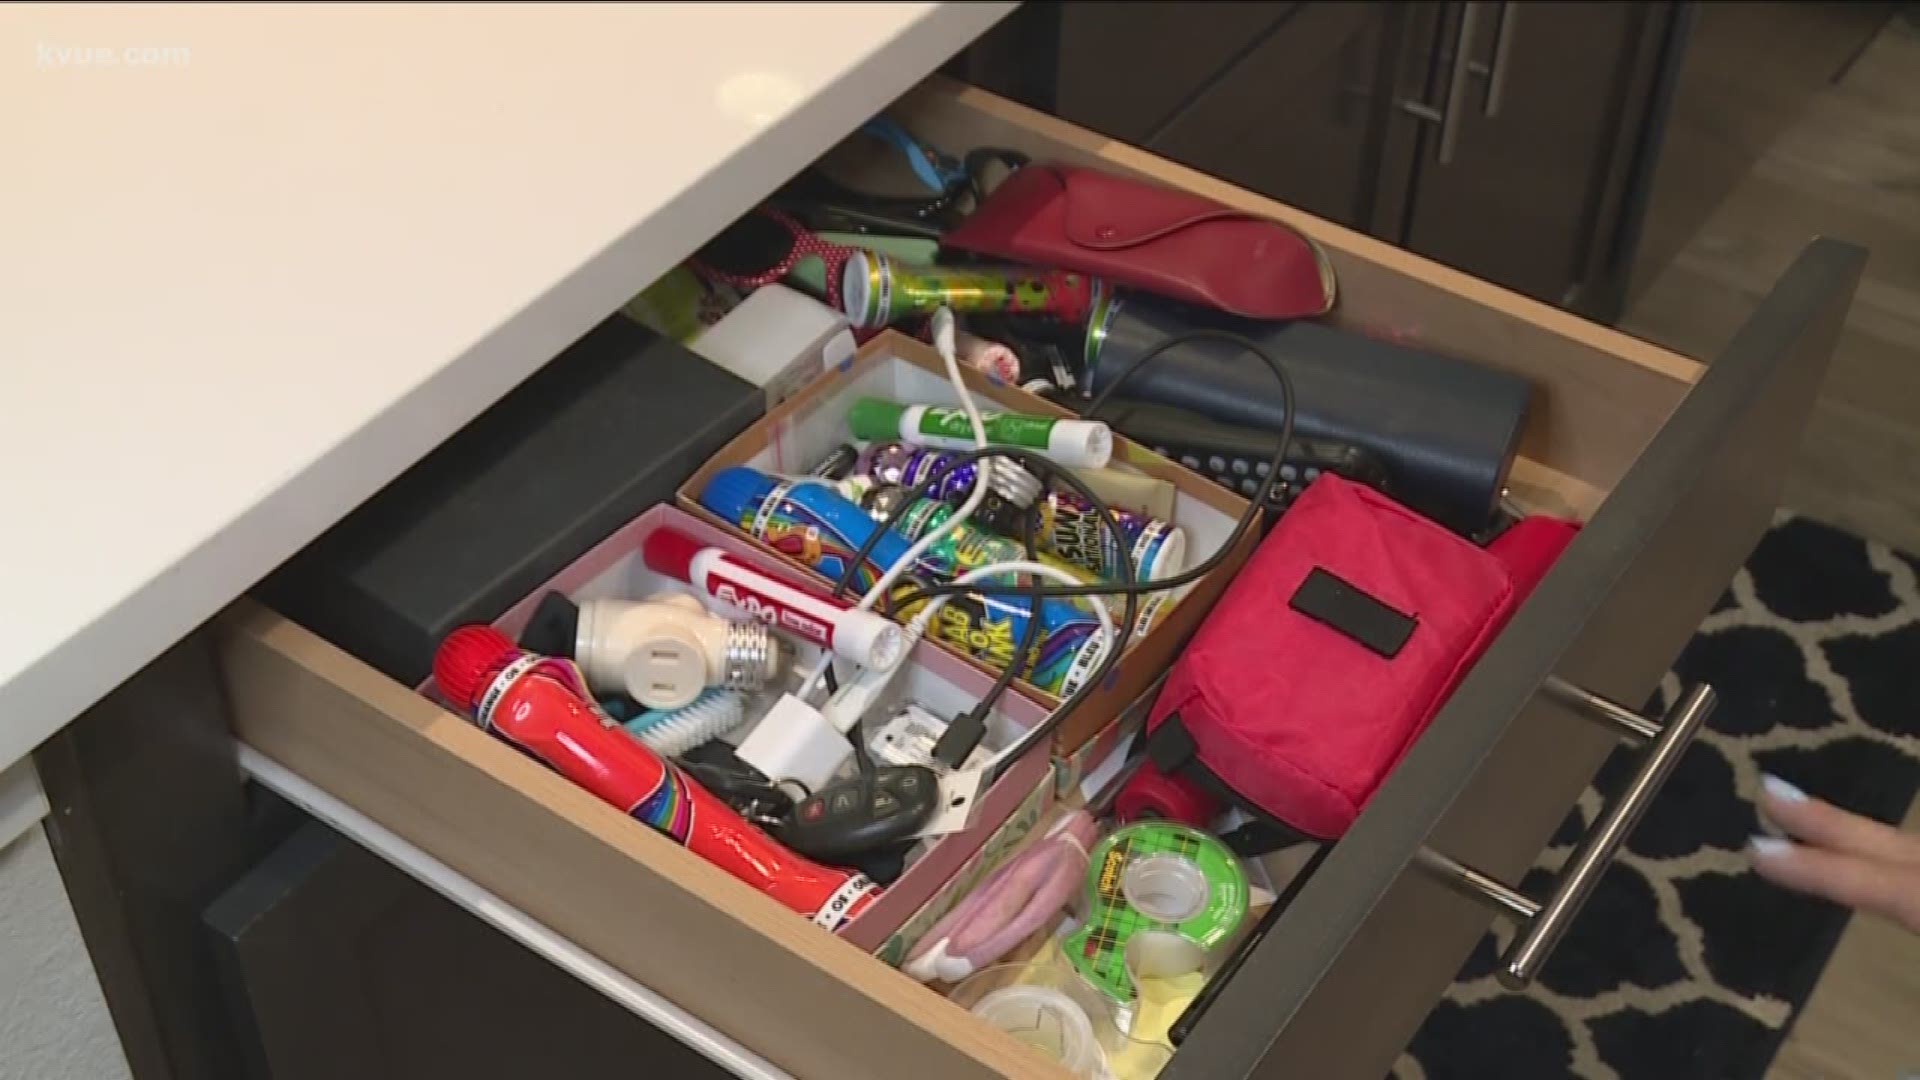 Organize your junk drawer, organize your closet, learn something new, meditate and more!